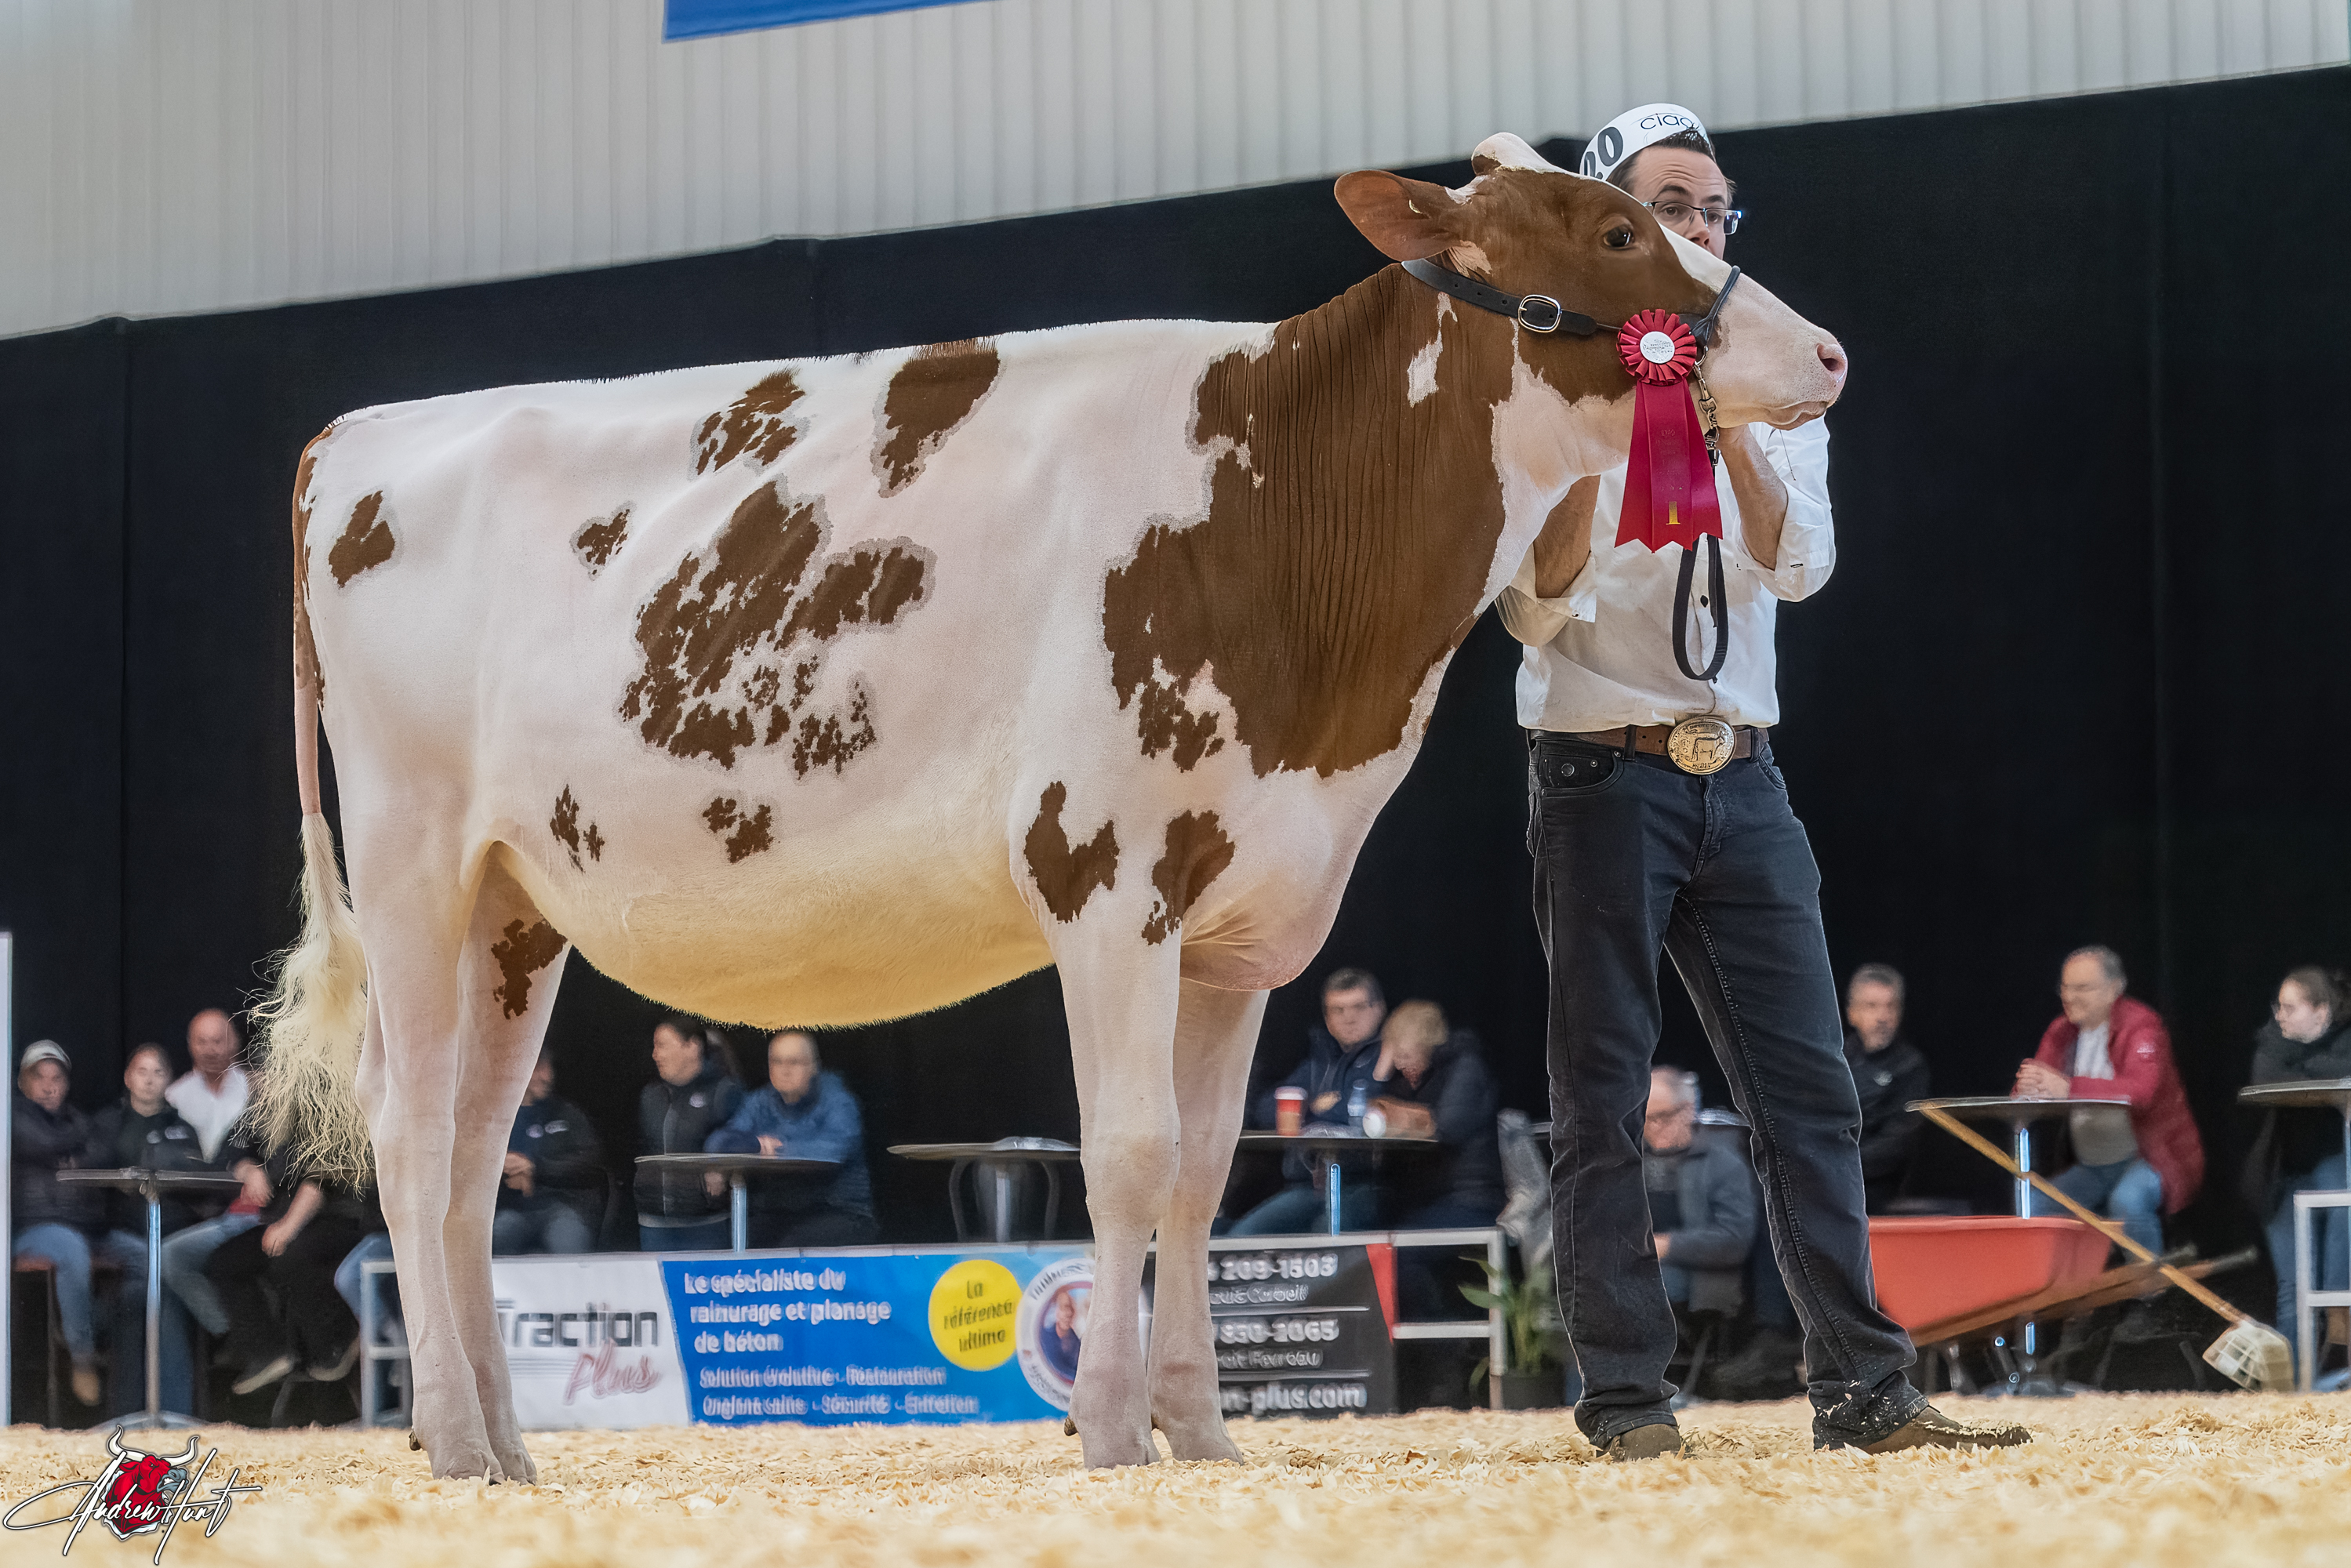 BETLEY LETS PARTY-RED-ET 1st place Winter Yearling Expo-Printemps / Quebec Spring Show - Red & White Holstein 2024 ERME FORTALE HOLSTEIN INC, JEAN-PHILIPPE PROULX, JM VALLEY HOLSTEIN, STITCHS HOLSTEIN, WEEKSDALE HOLSTEINS INC, SAINT-CHRISTOPHE-D'ARTHABASKA, QC